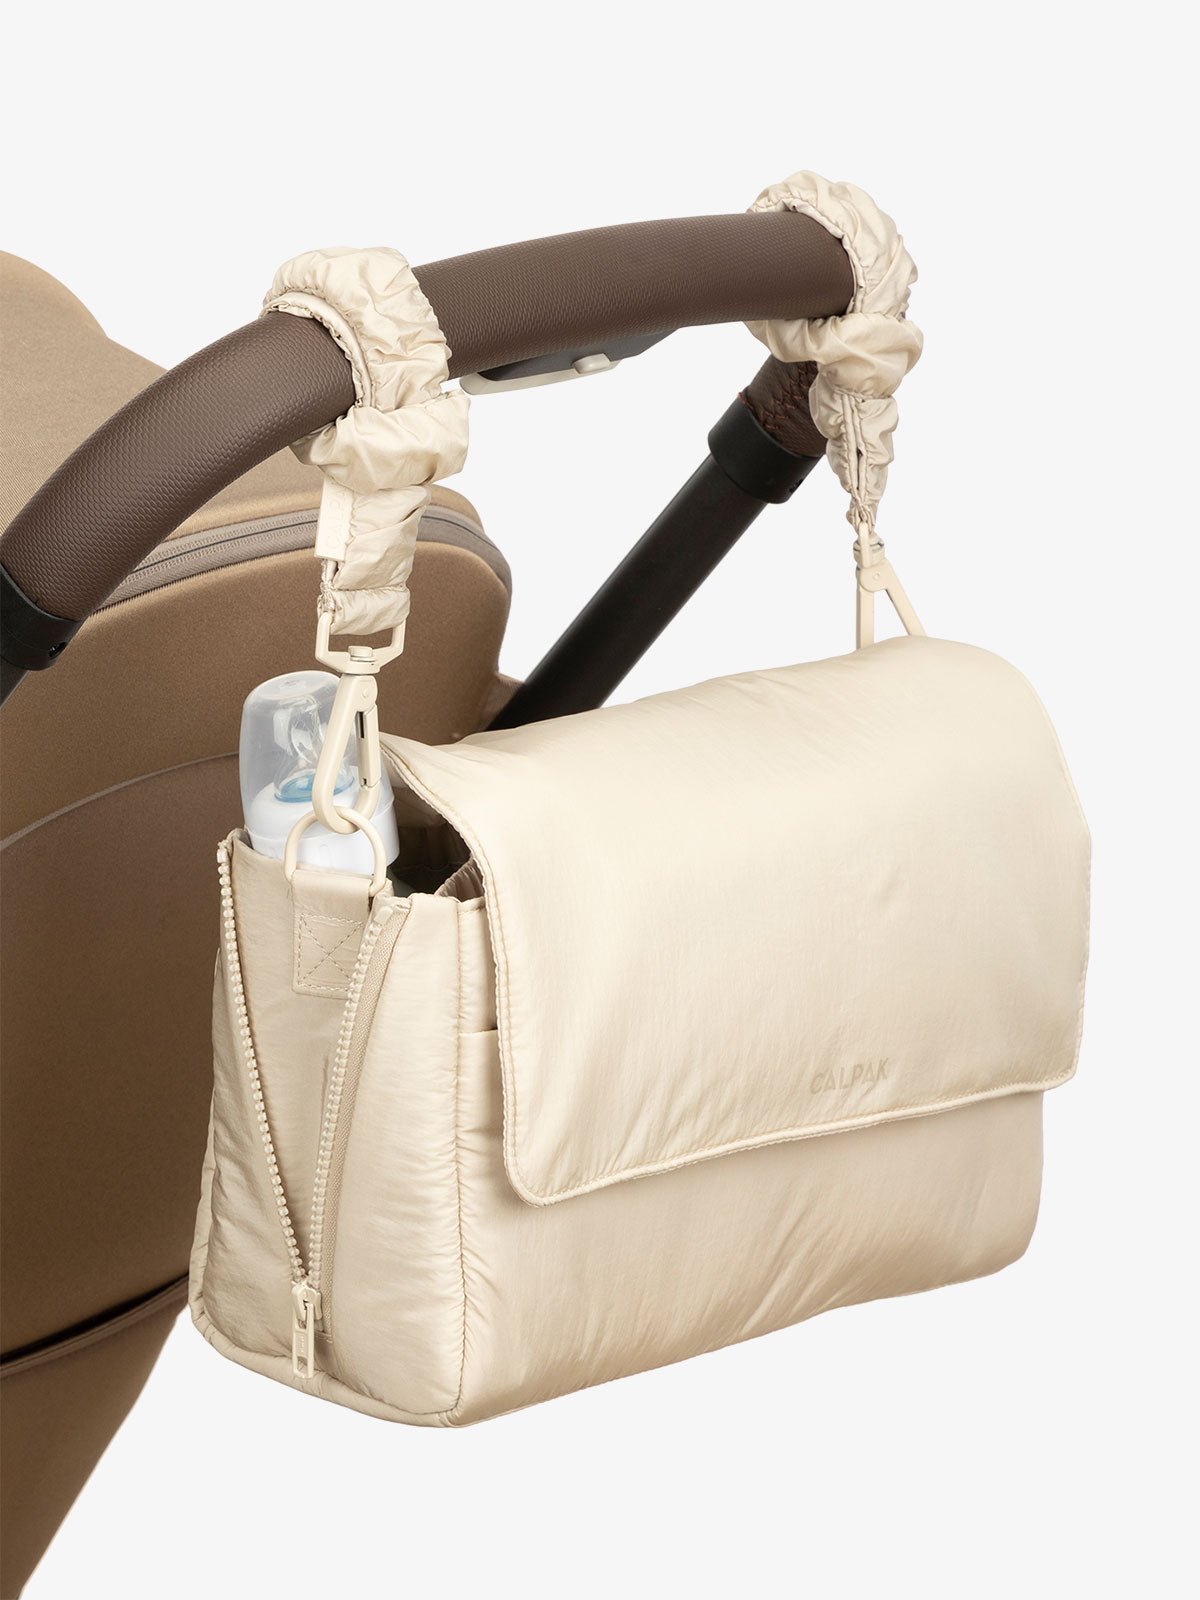 CALPAK Convertible Stroller Caddy Crossbody with included stroller straps in beige oatmeal